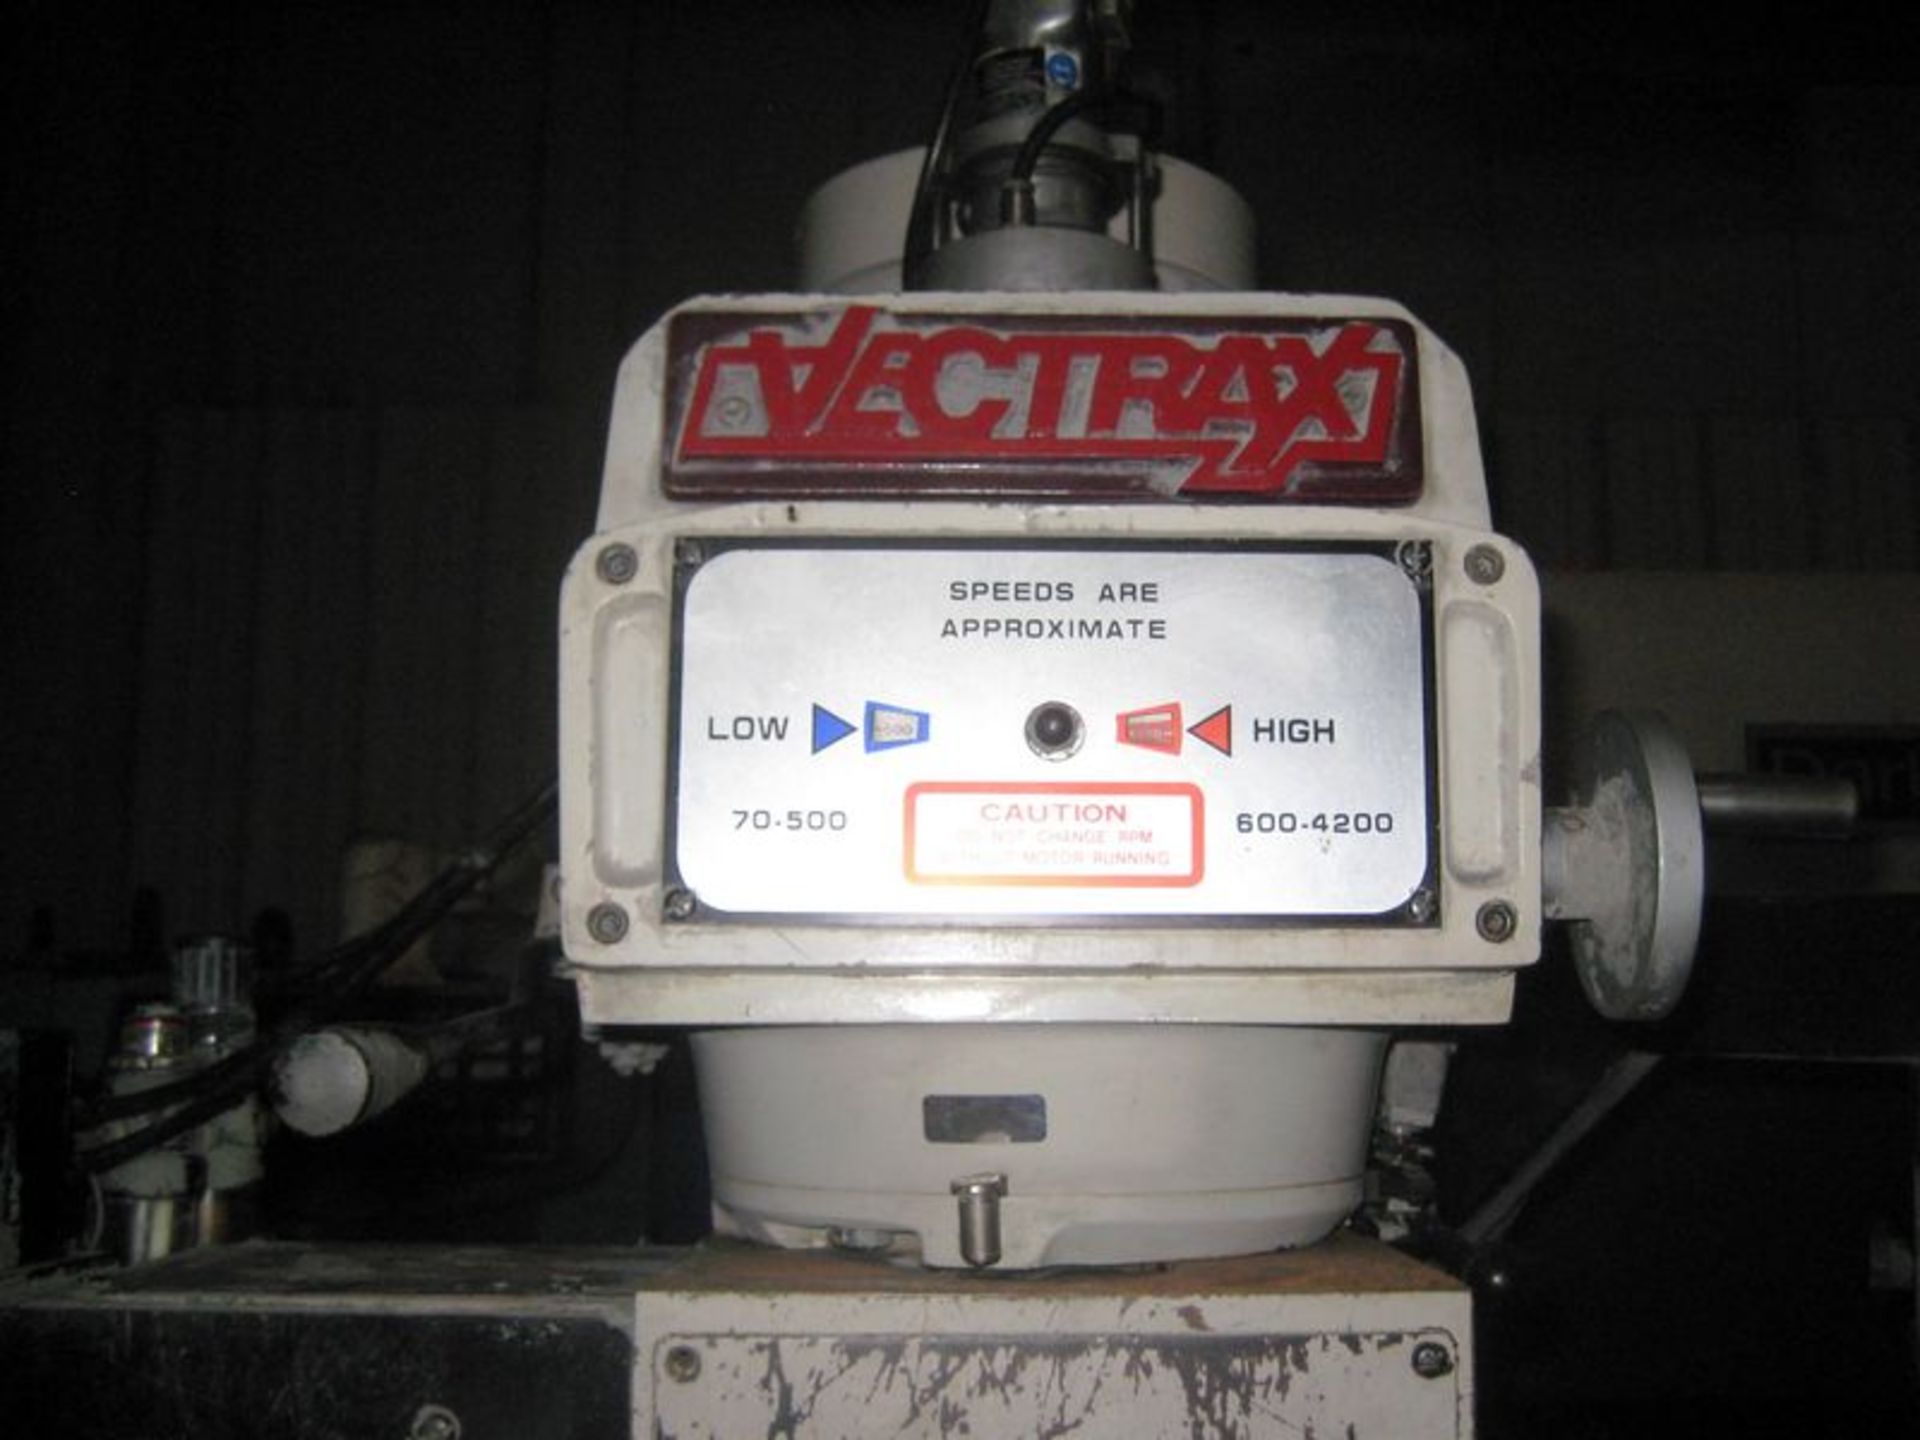 Vectrax GS-N16V 3-Axis CNC Knee Type Milling Machine, S/N 9030192NV, New 2001 Specifications, Table, - Image 3 of 5